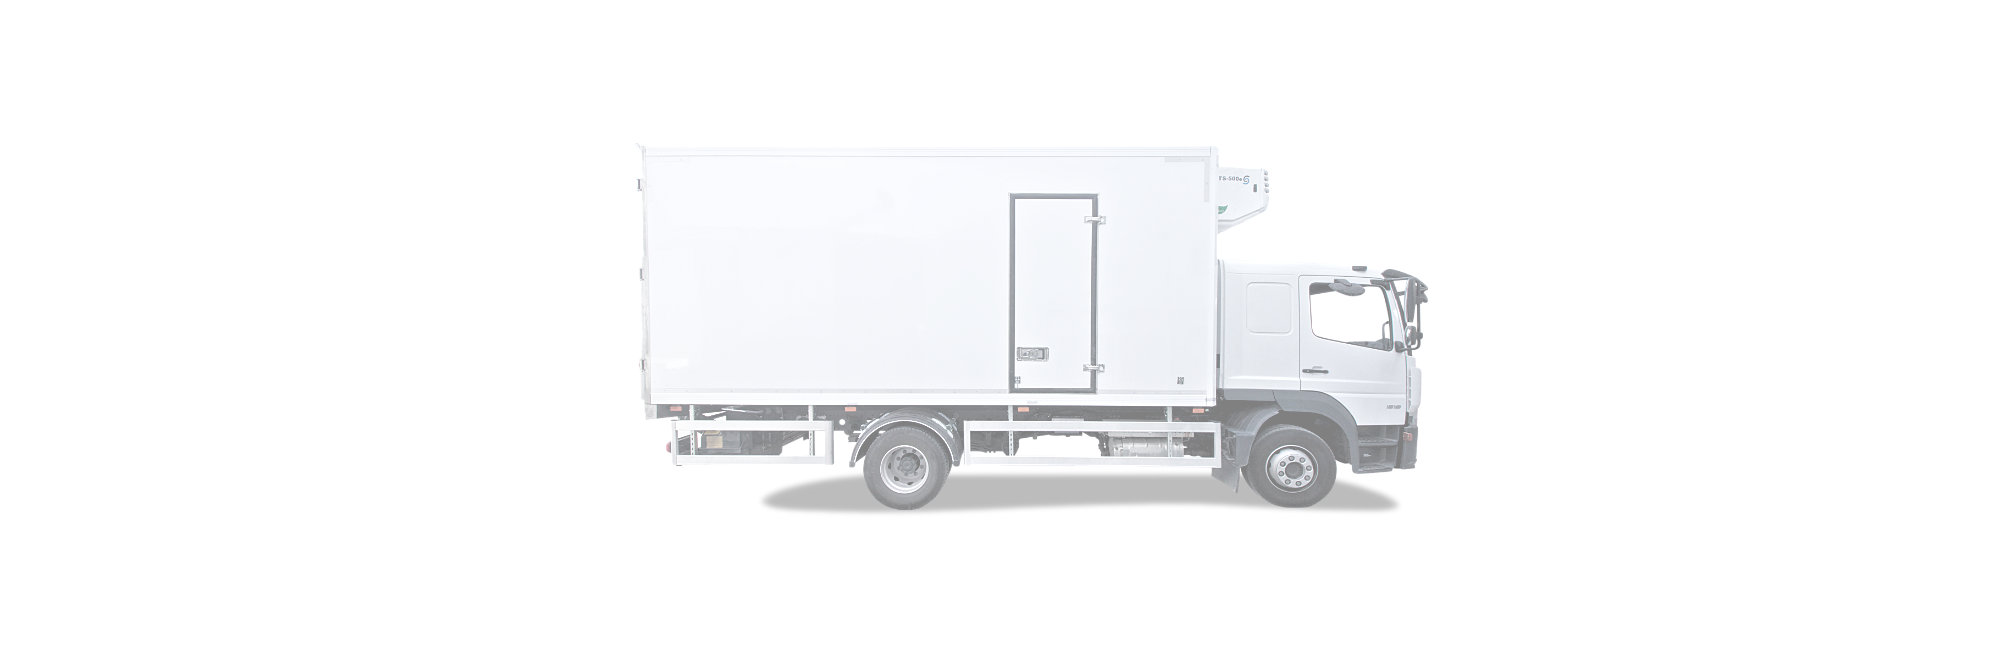 Decopan Commercial Vehicle FRP GRP laminates gallery meat and fresh food trailer, truck body